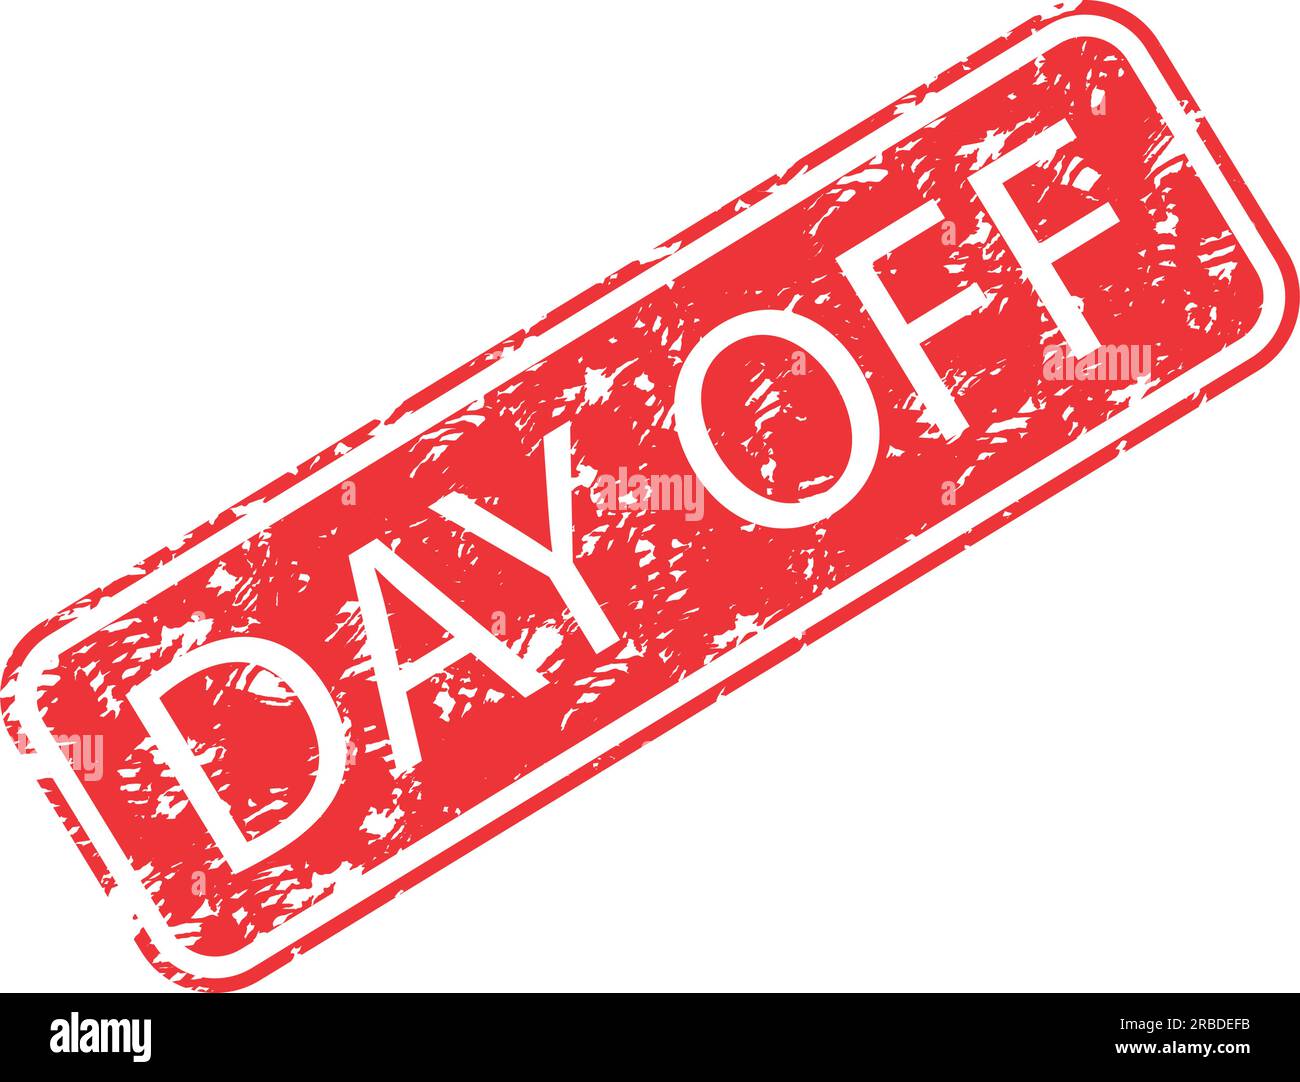 Rubber stamp day off. Vector off-duty, time out and personal day, time away and off work, holiday stamp illustration Stock Vector